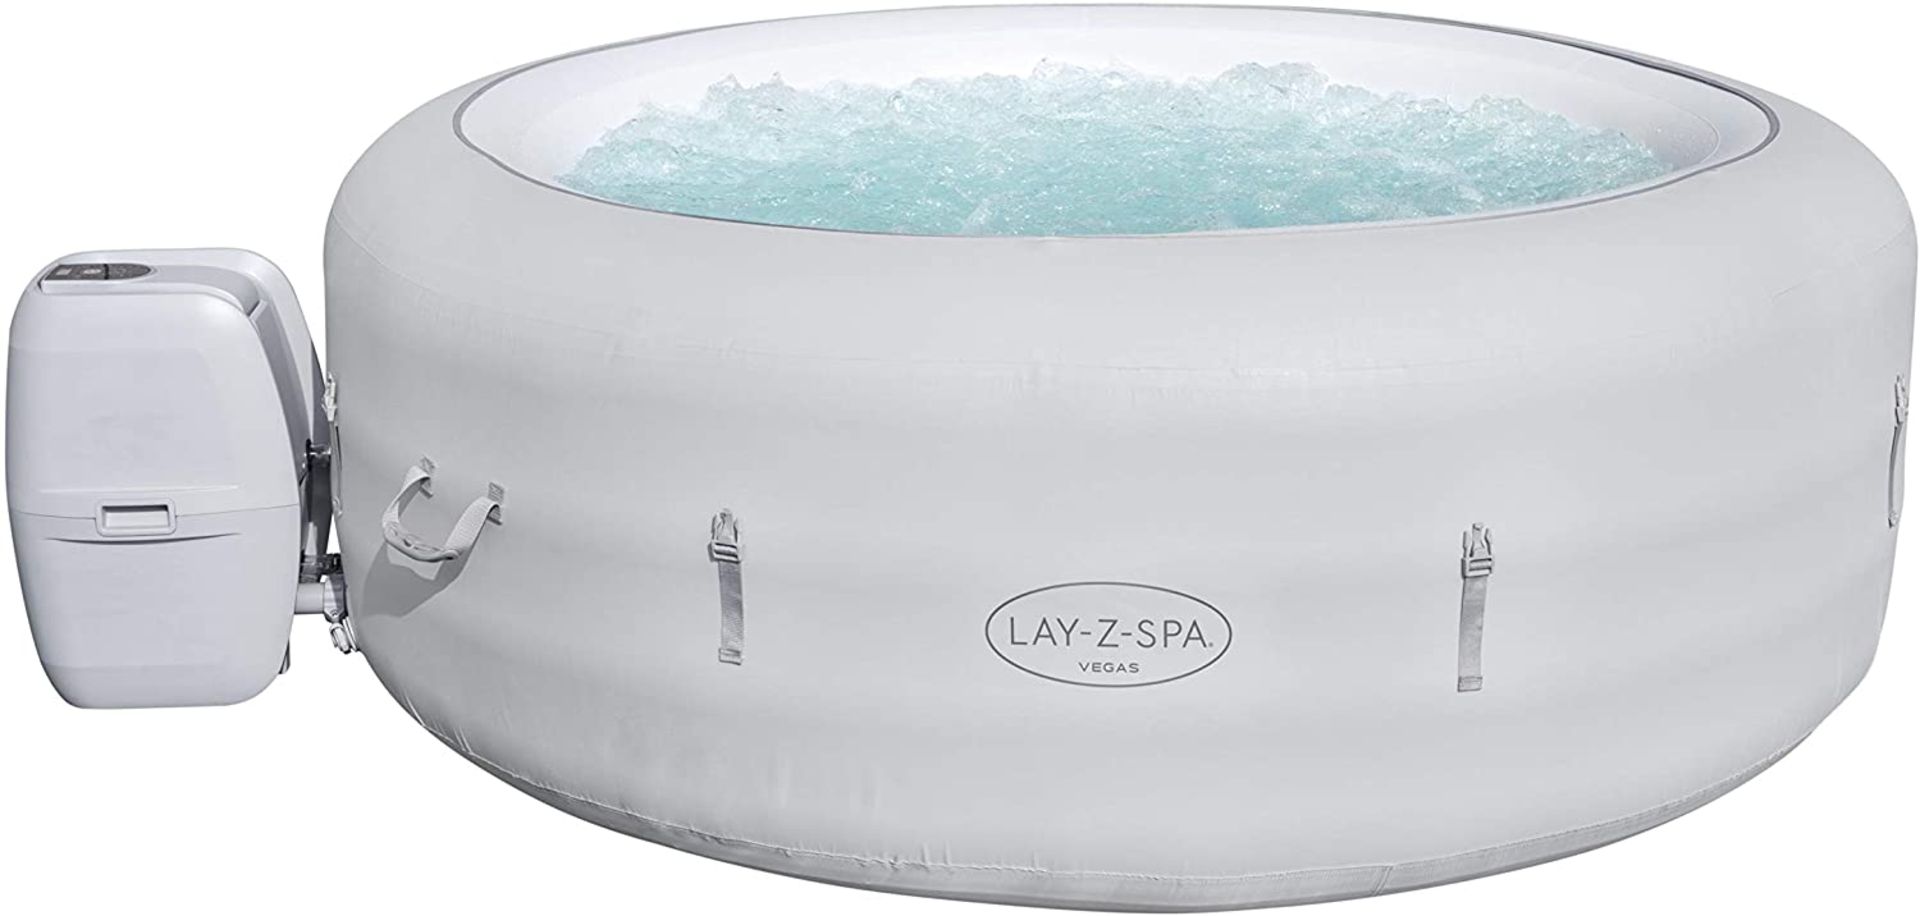 (2J) 1x Bestway Lay-Z-Spa Vegas Portable Hot Tub. RRP £599.00. (Lot Comes With Pump, Main Body, Inf - Image 2 of 8